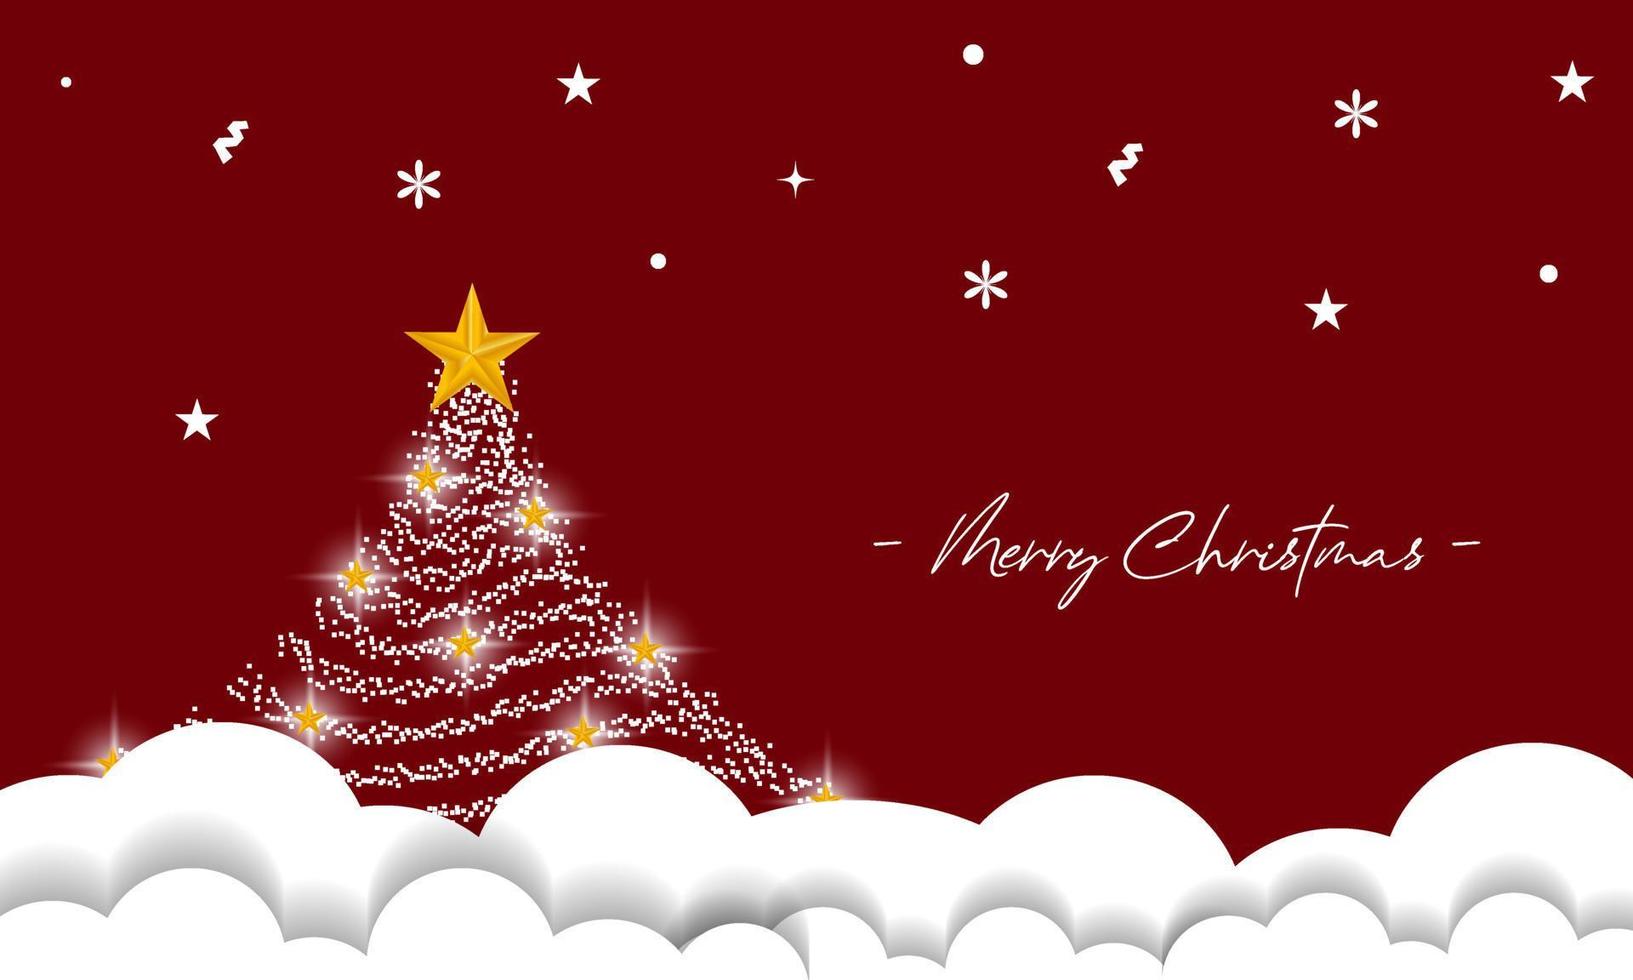 merry christmas background with christmas tree ornaments and clouds vector